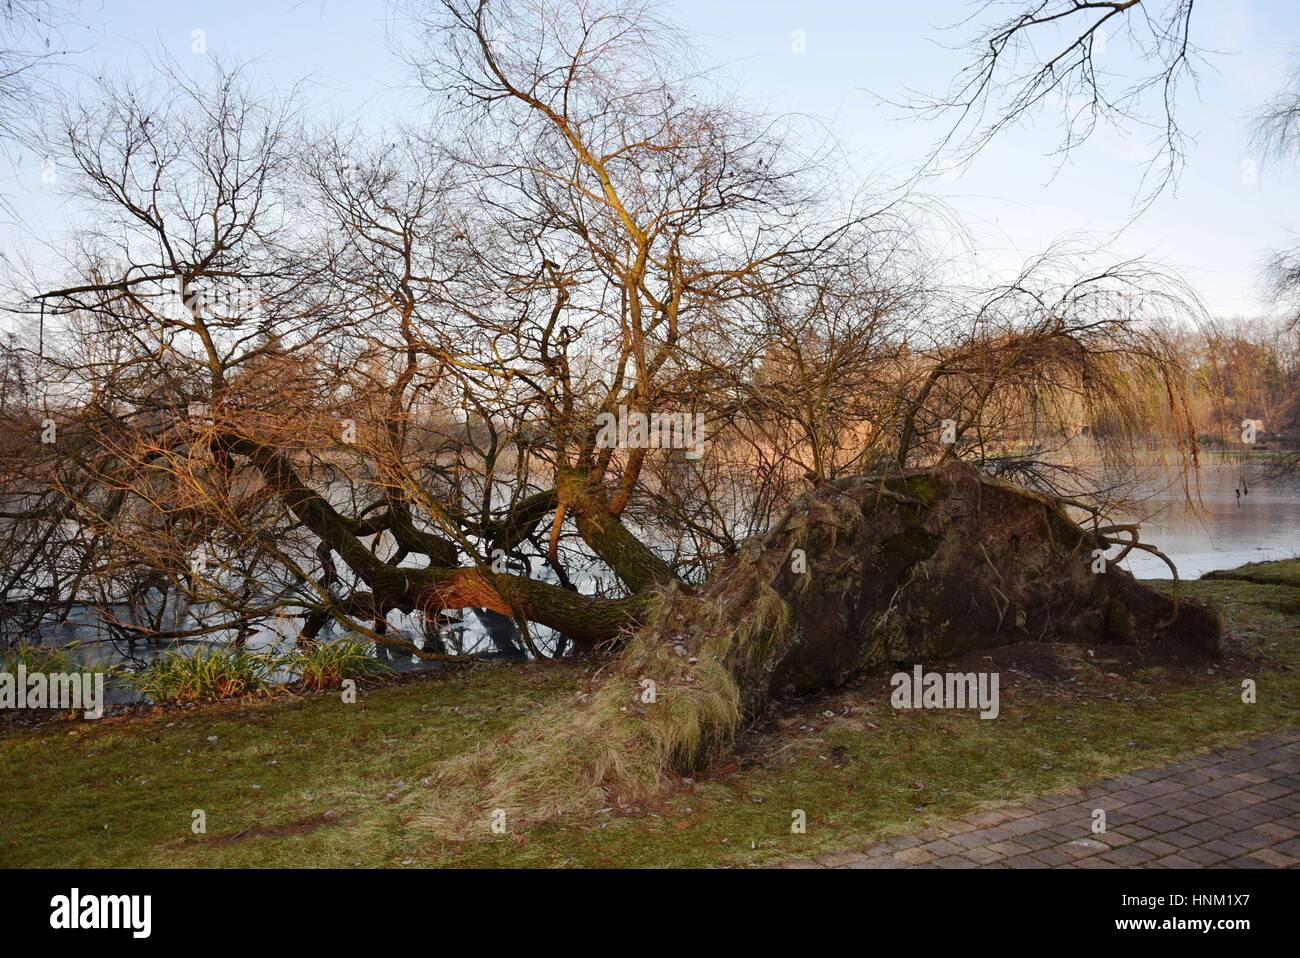 Tree fallen into the lake and surviving with just a few roots in the ground. Stock Photo